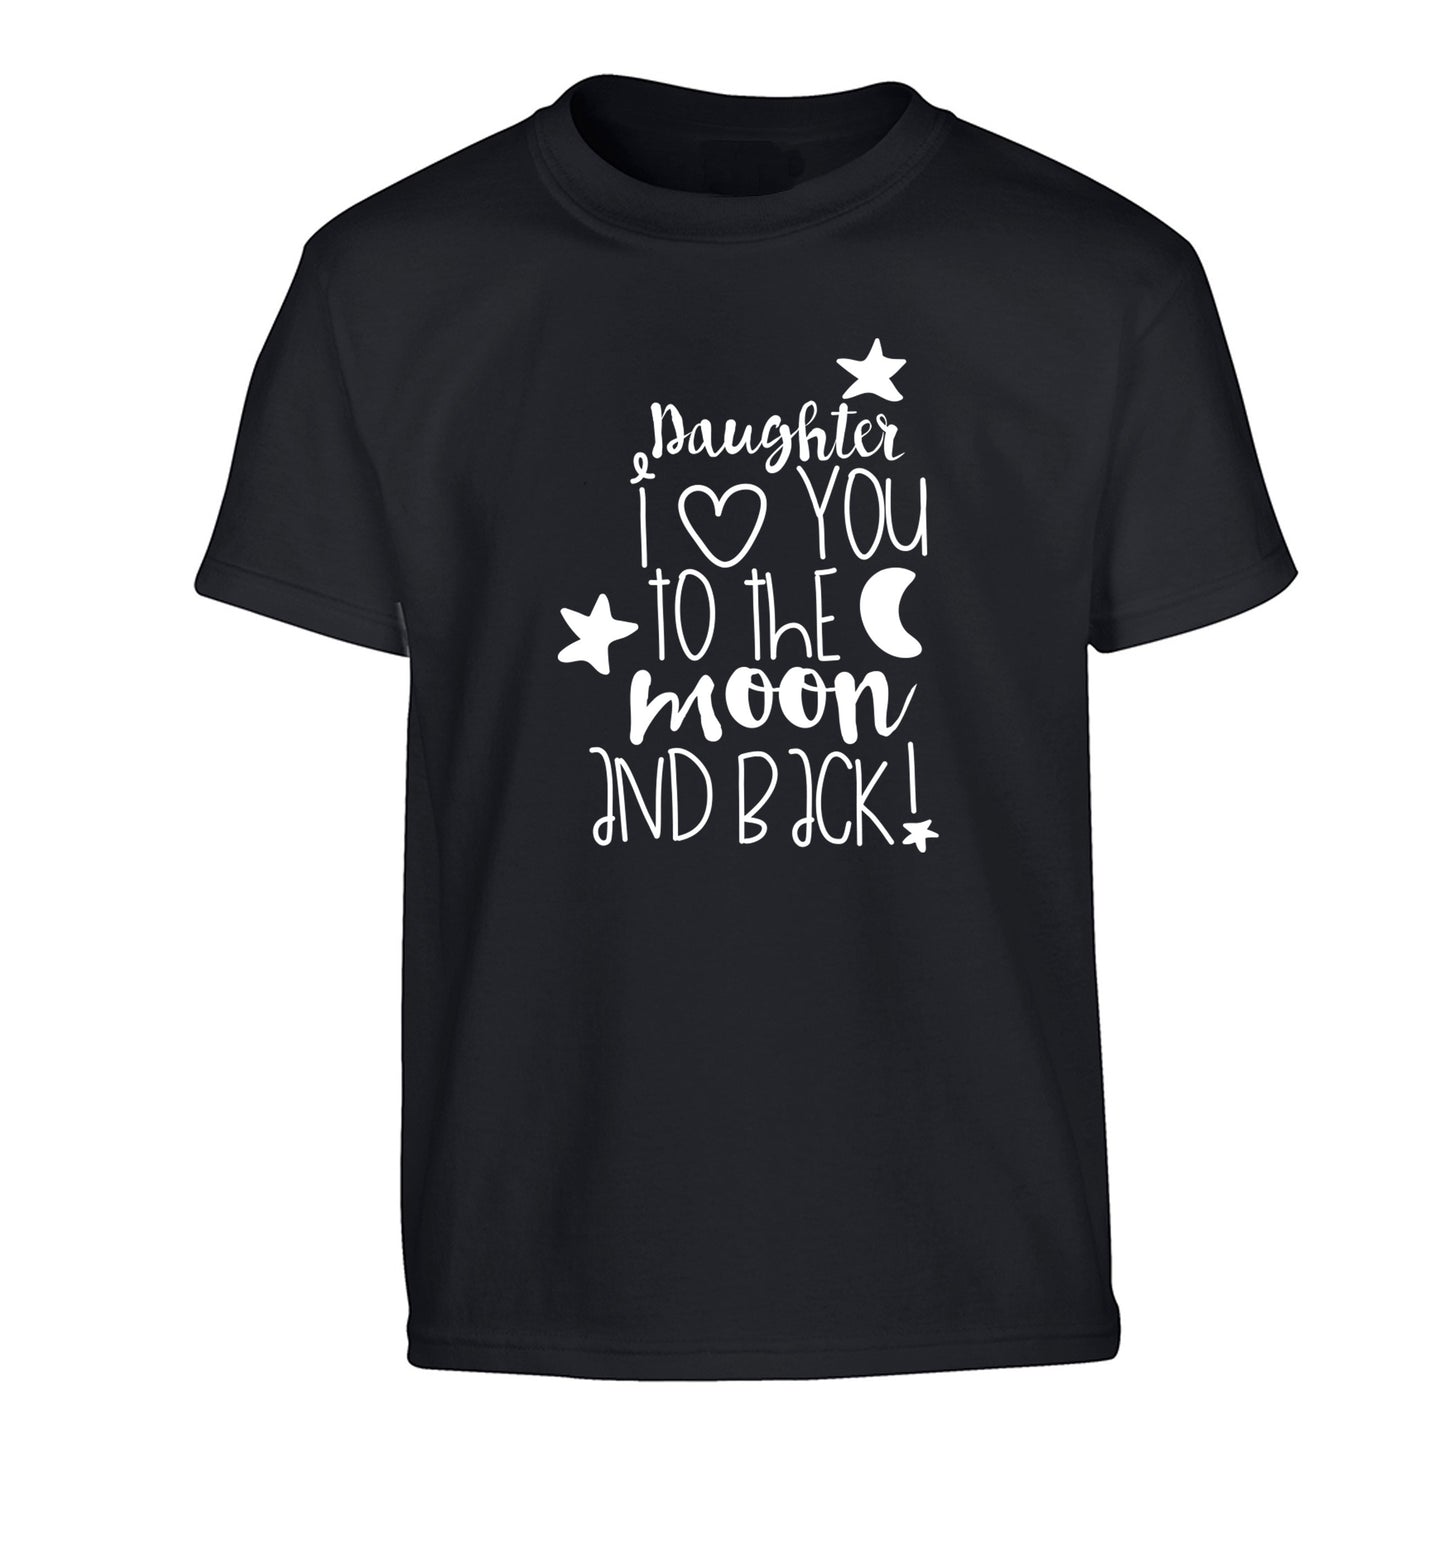 Daughter I love you to the moon and back Children's black Tshirt 12-14 Years